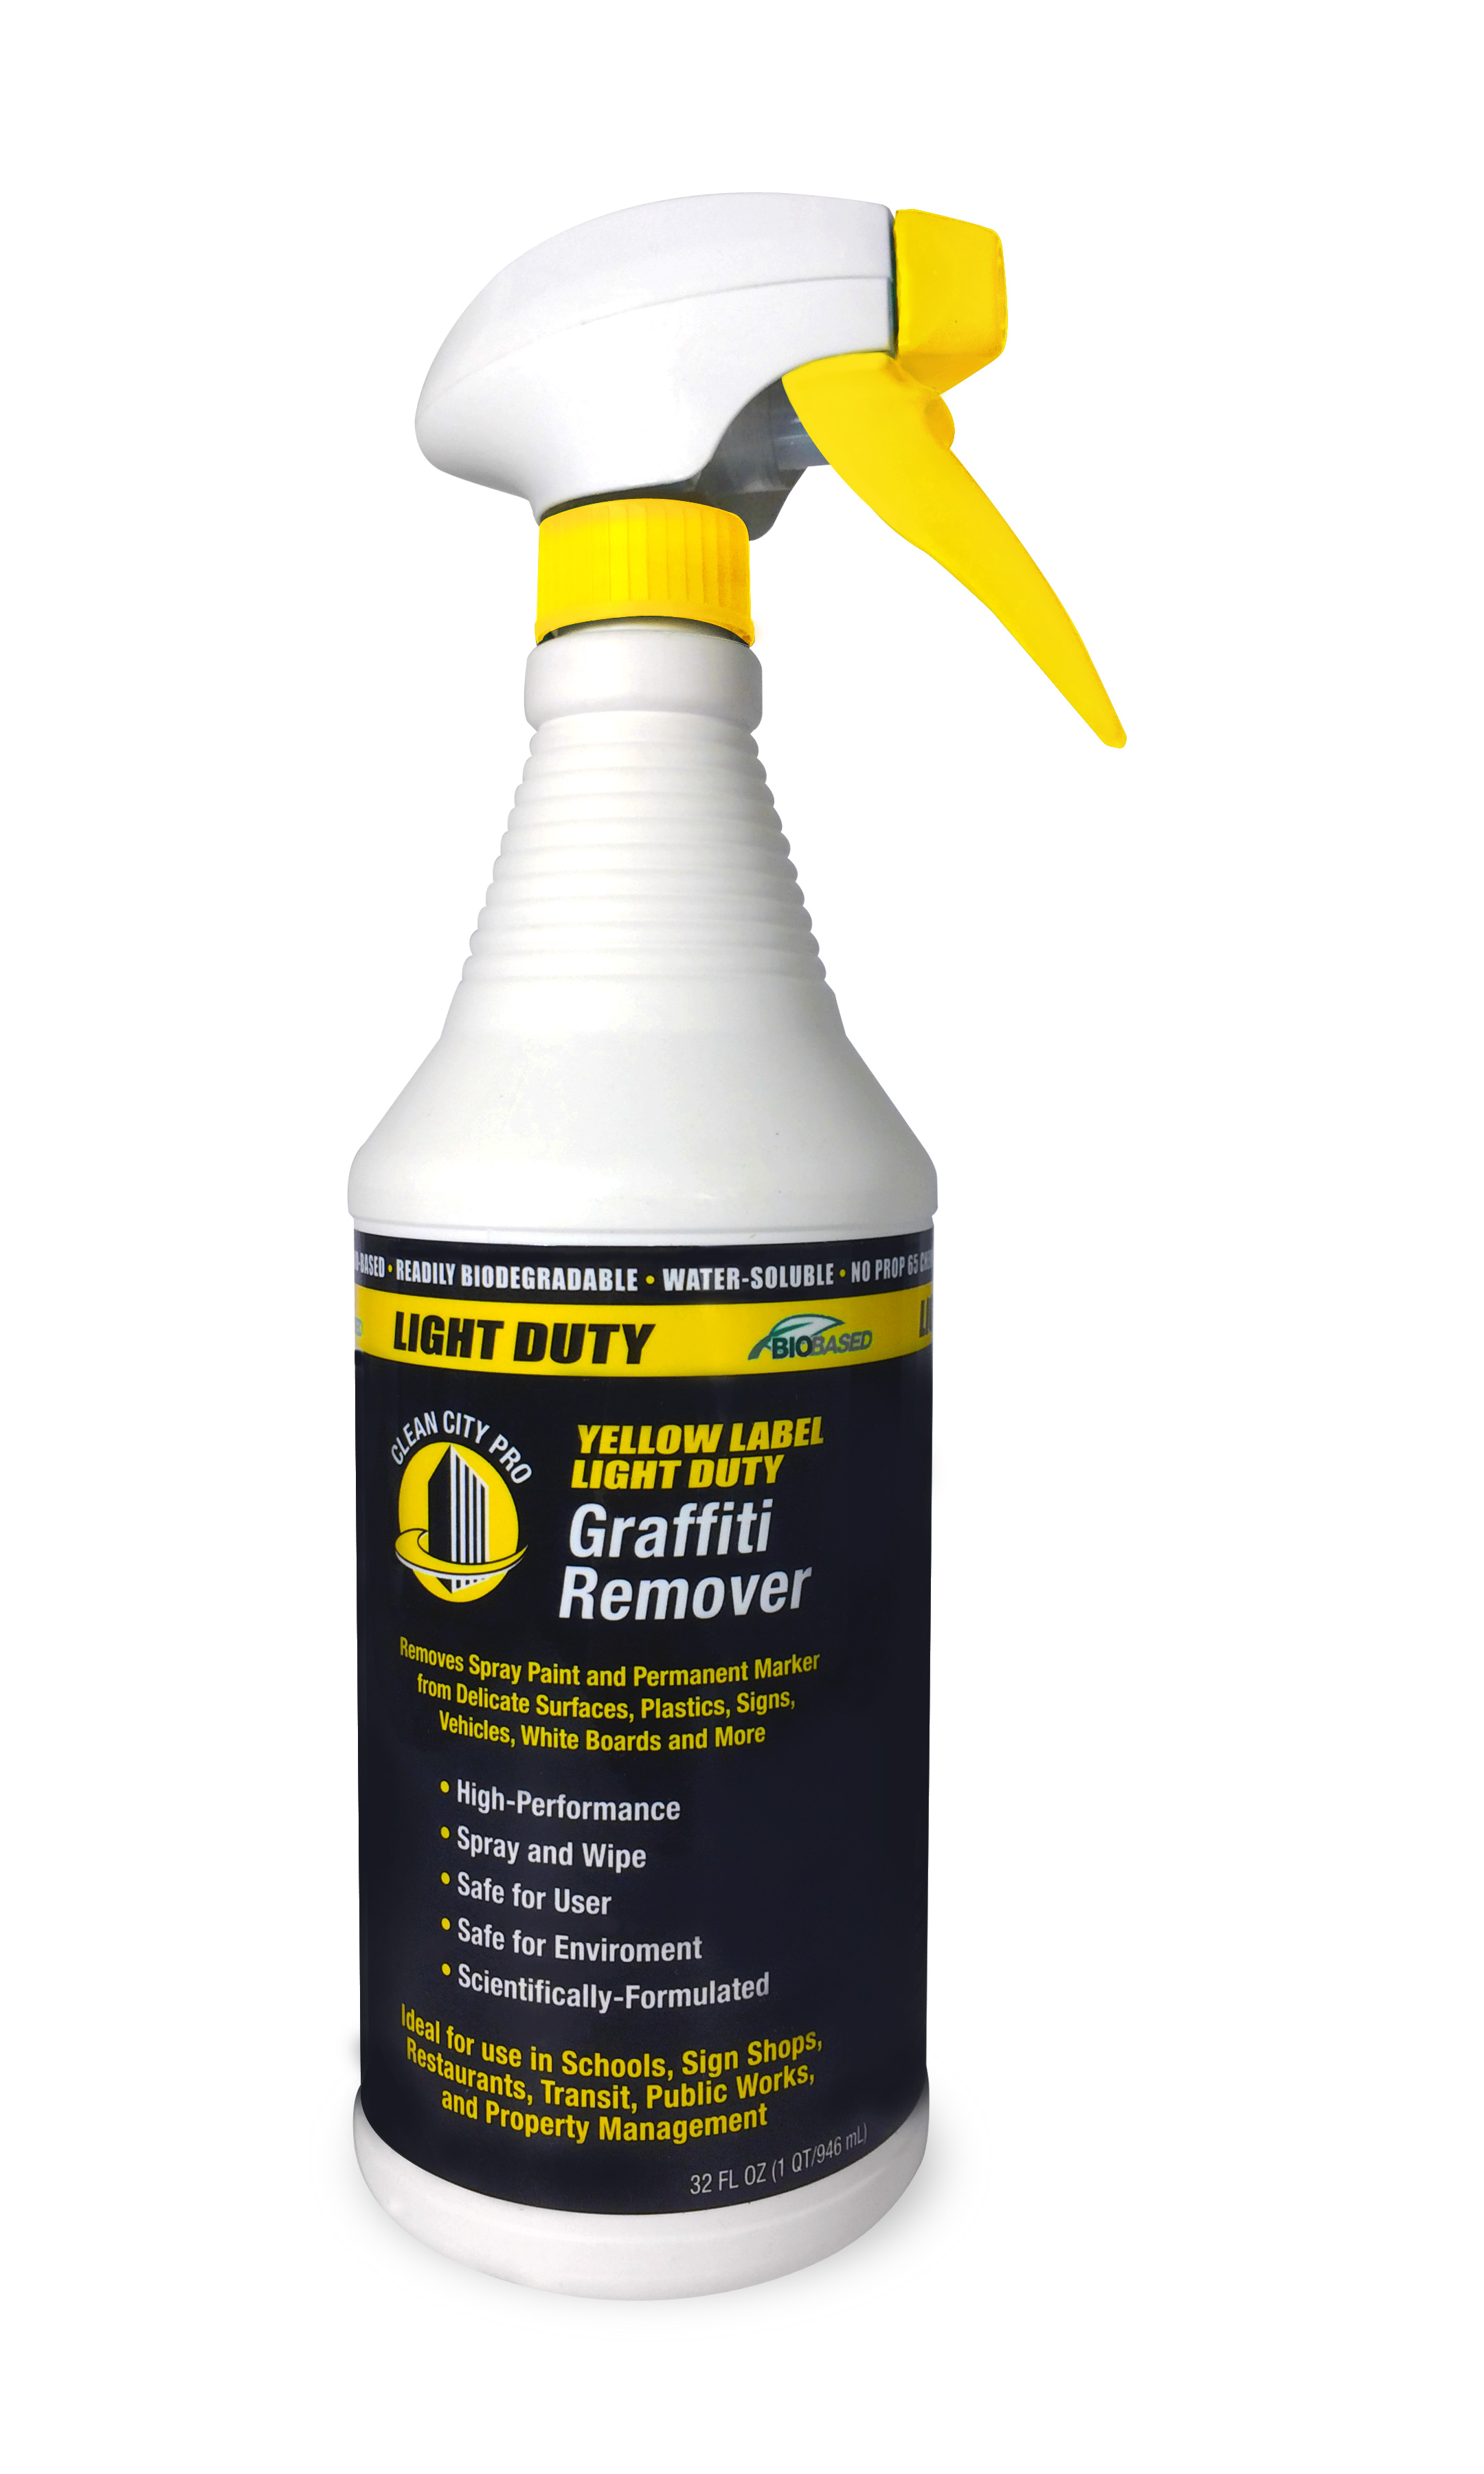 Unbelievable Graffiti Off Paint Remover – Brighton Cleaning Supplies